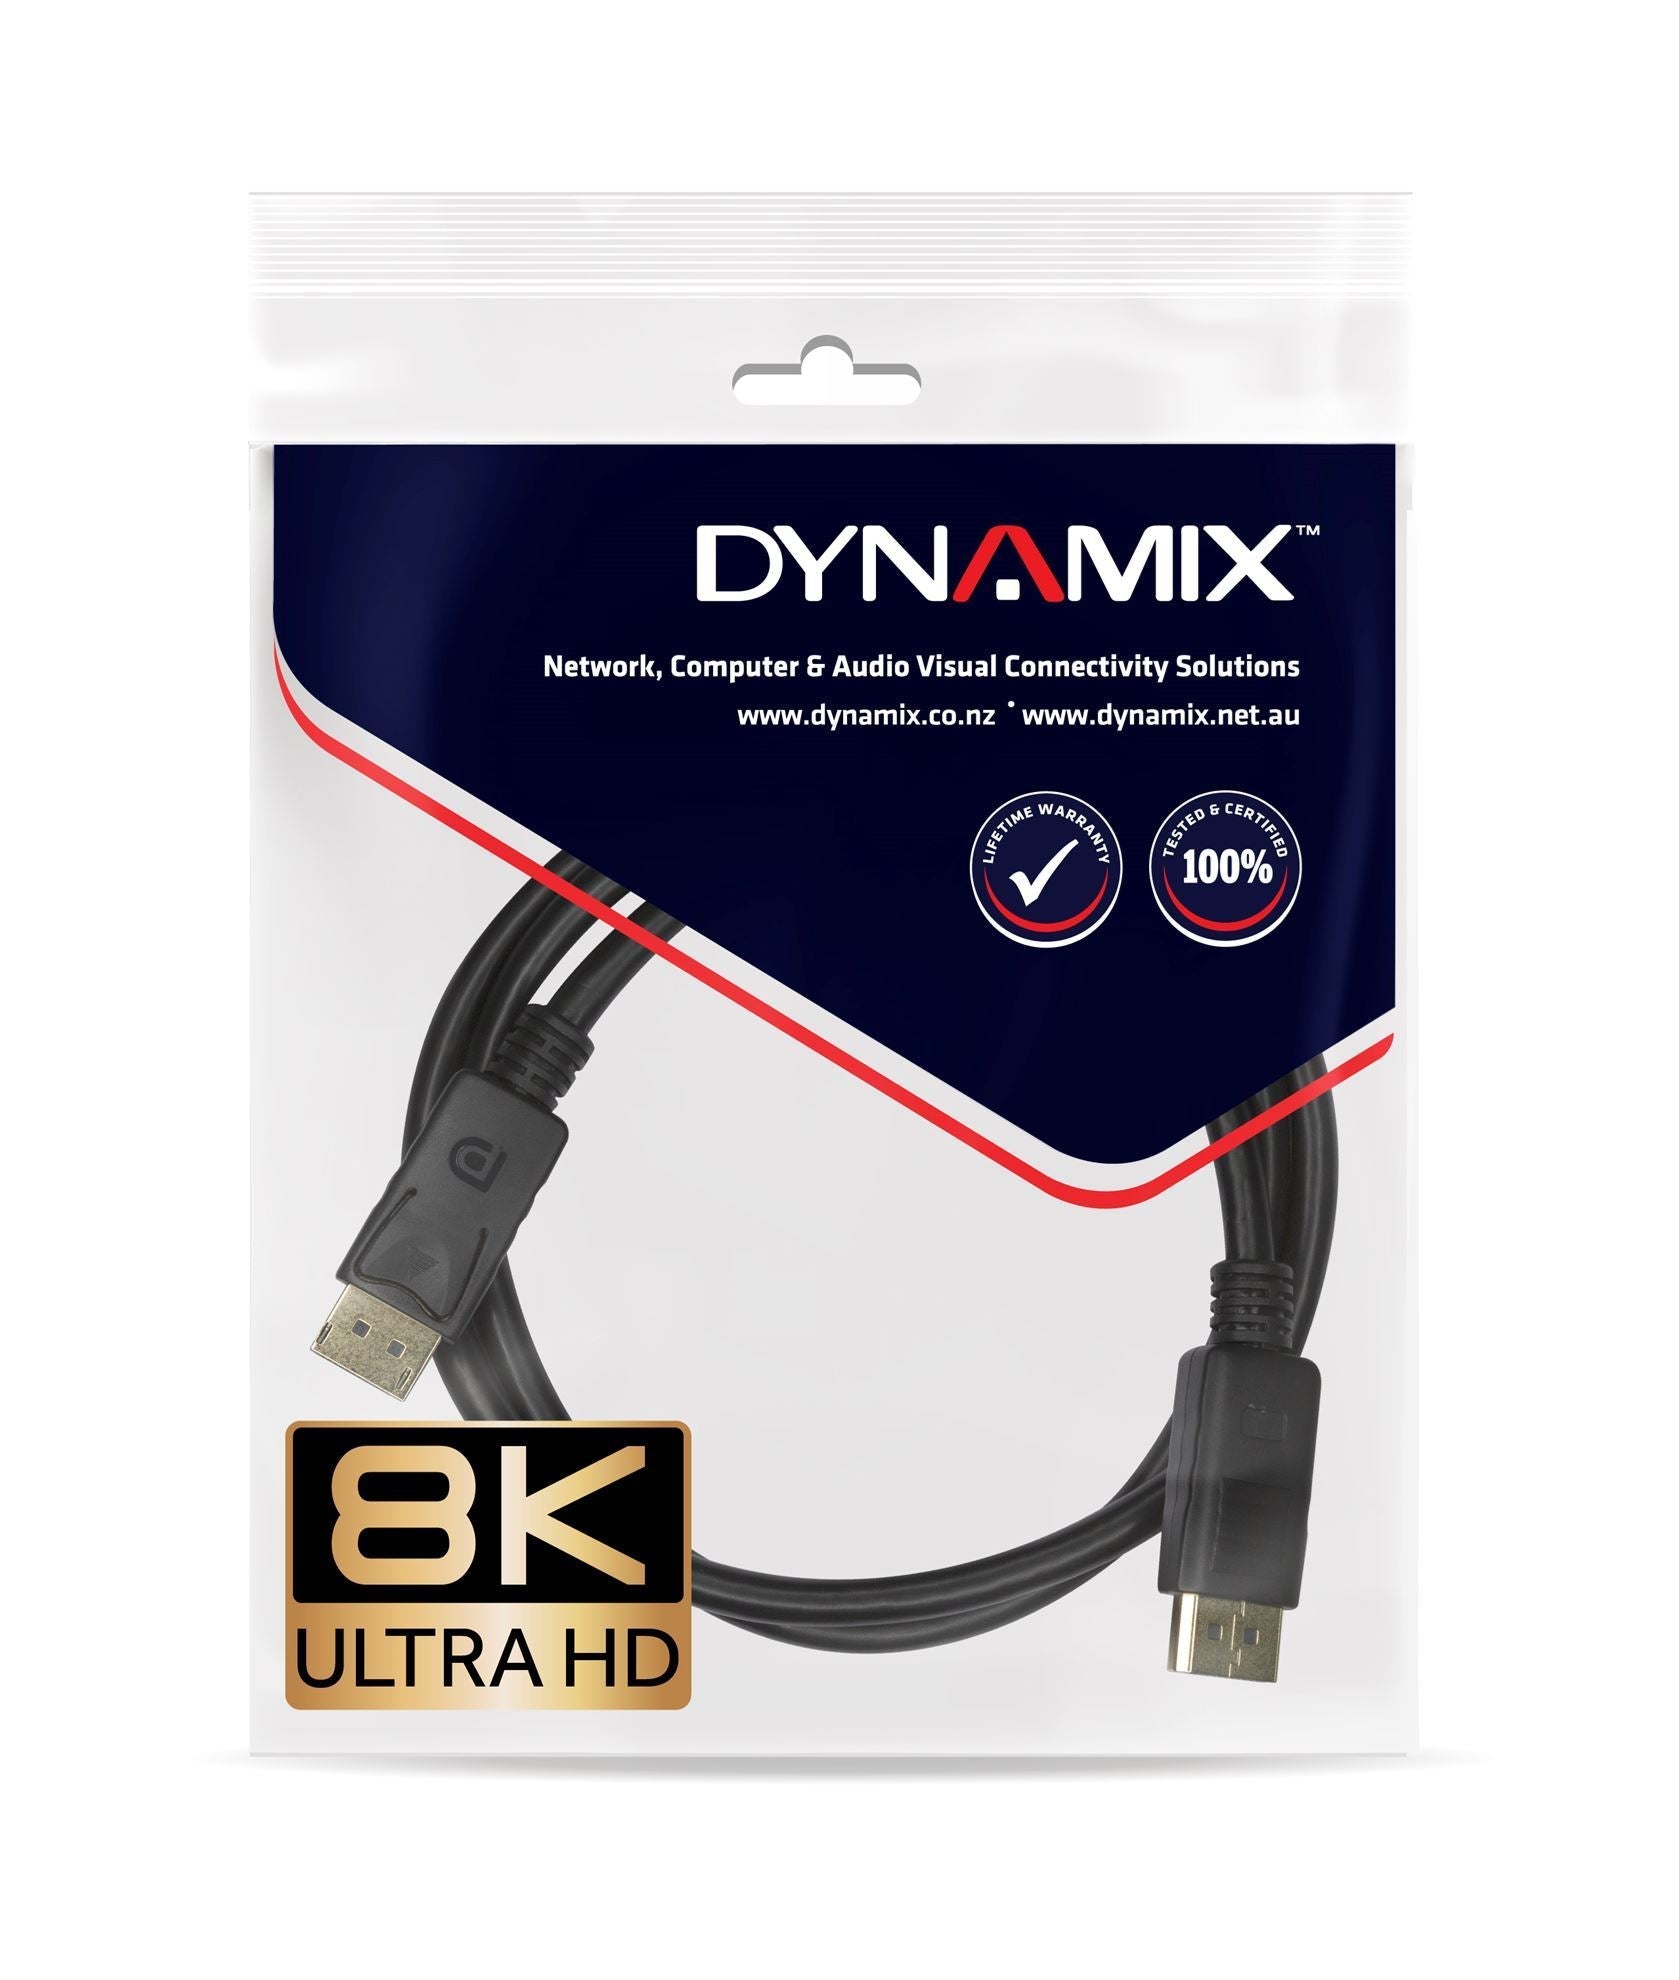 DYNAMIX_2m_DisplayPort_V1.4_Cable_Supports_up_to_8K_(FUHD)_Resolution._28AWG,_M/M_DP_Connectors,_Max._Res_7680x4320_@_60Hz,_Latched_Connectors,_Flexible_Cable,_Gold-Plated_Connectors. 577